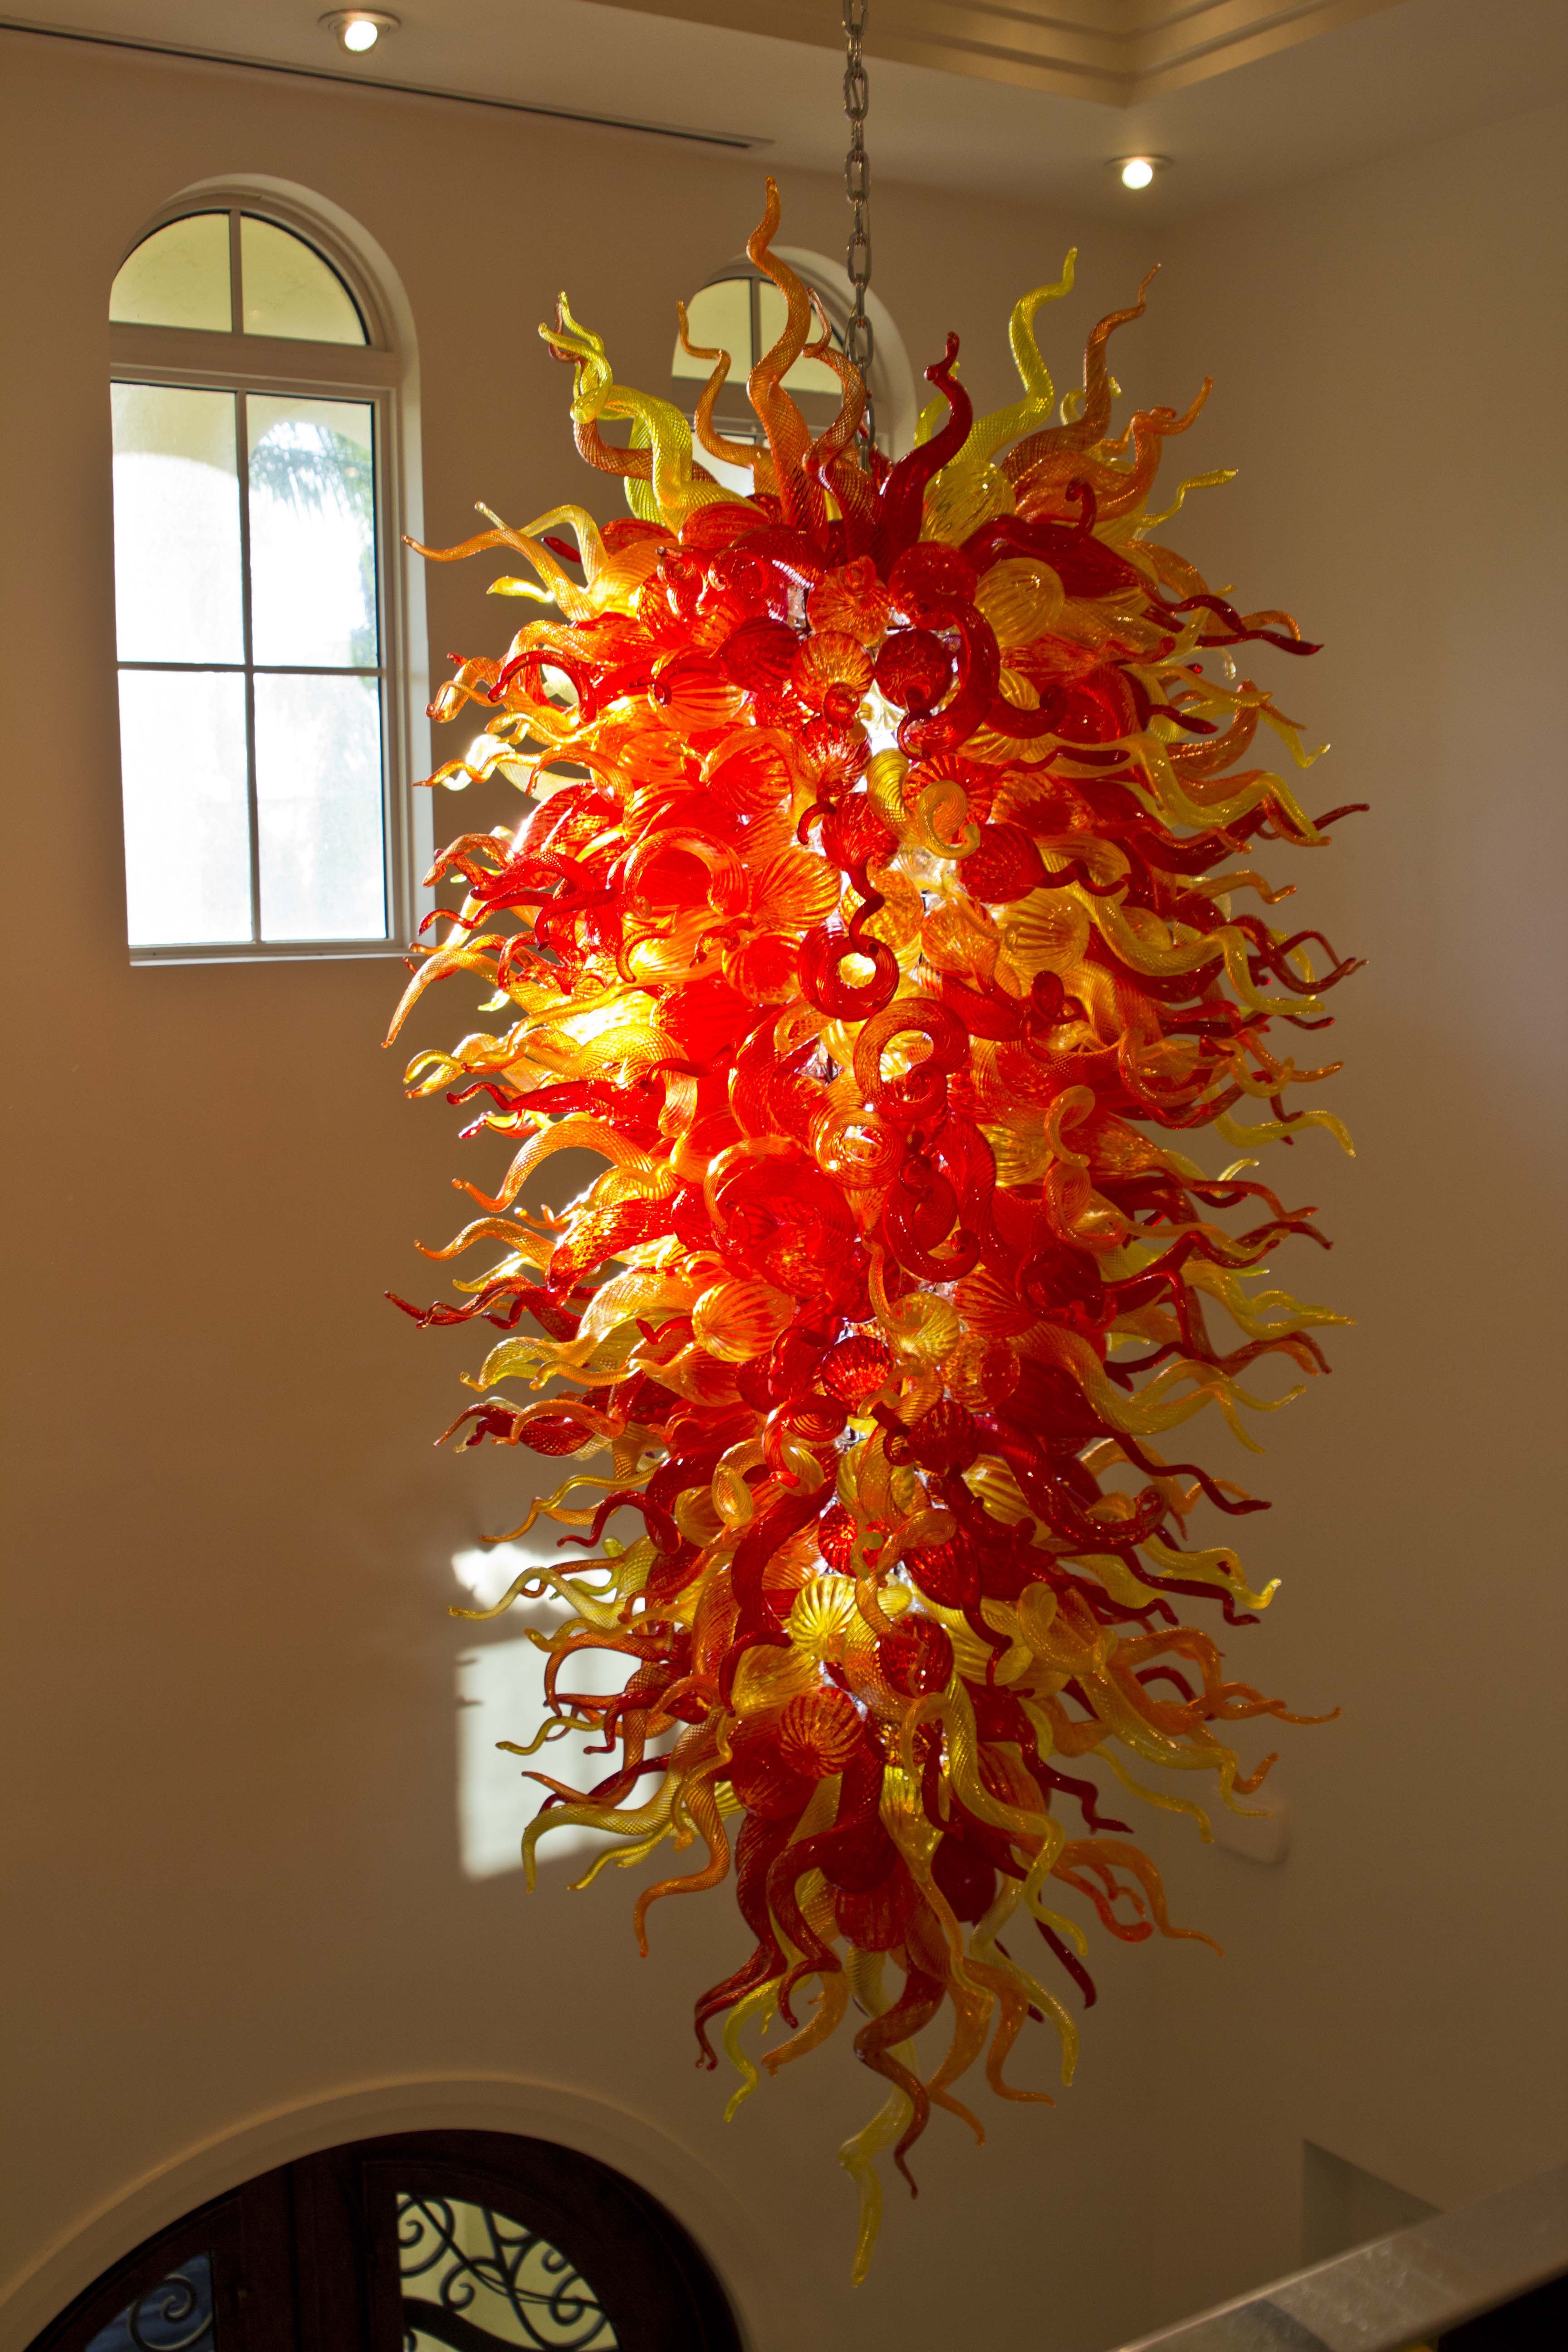 Hand Crafted Miami Sunrise Hand Blown Glass Art Chandeliers